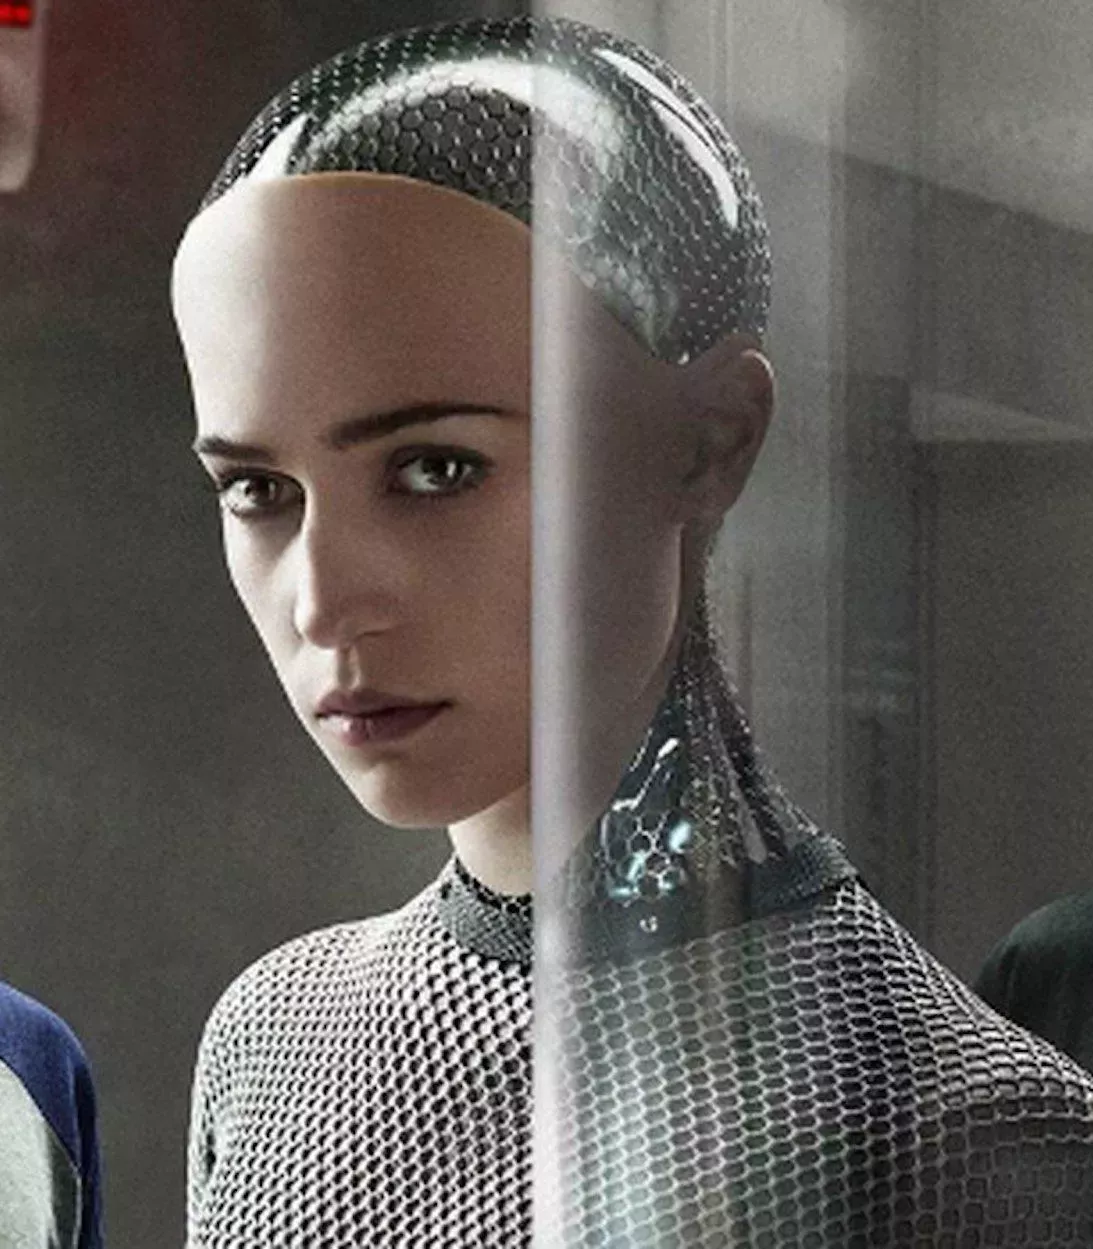 Ava looking at the camera in Ex Machina